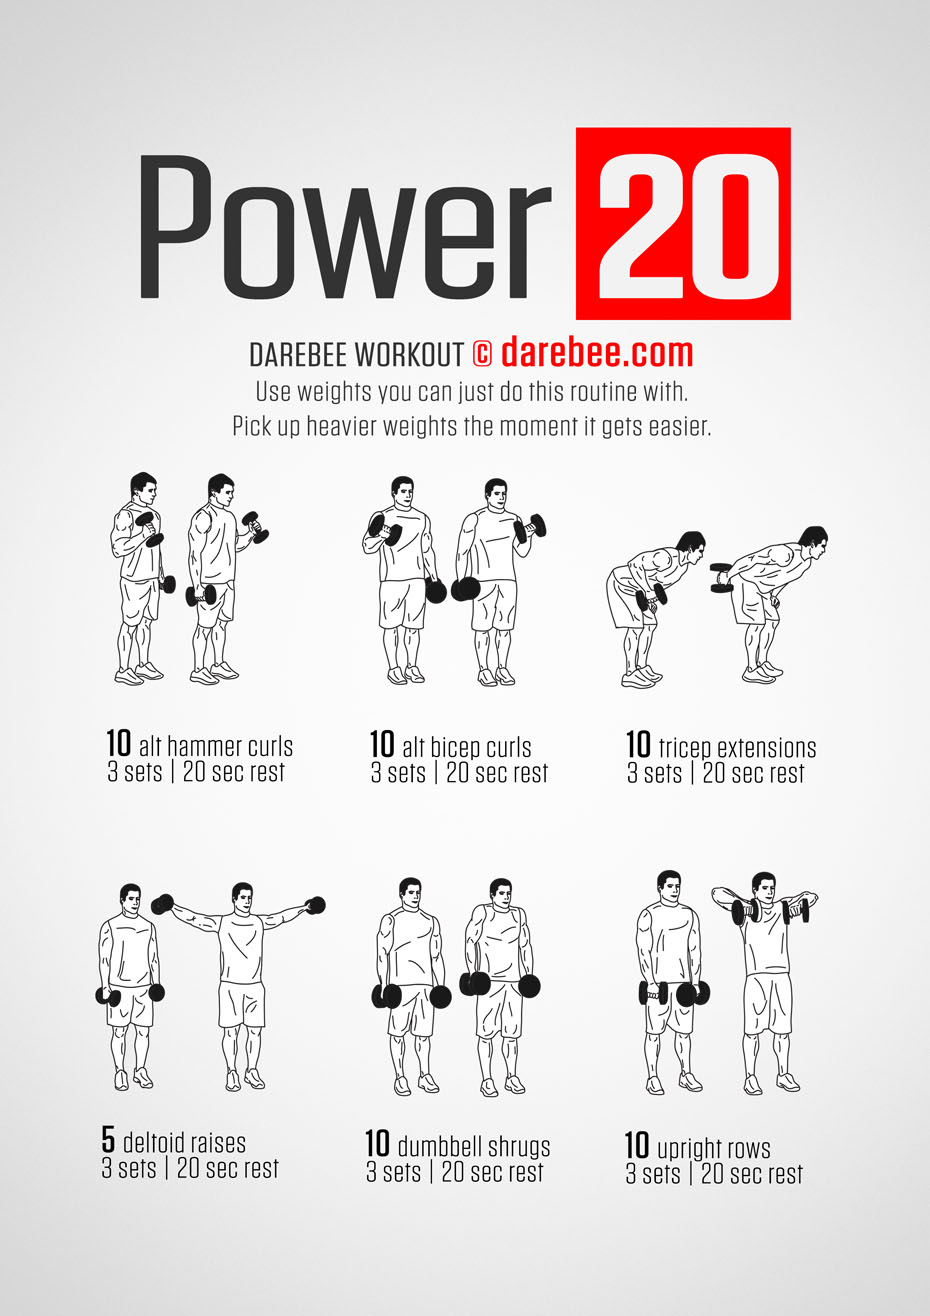 Power 20 Workout